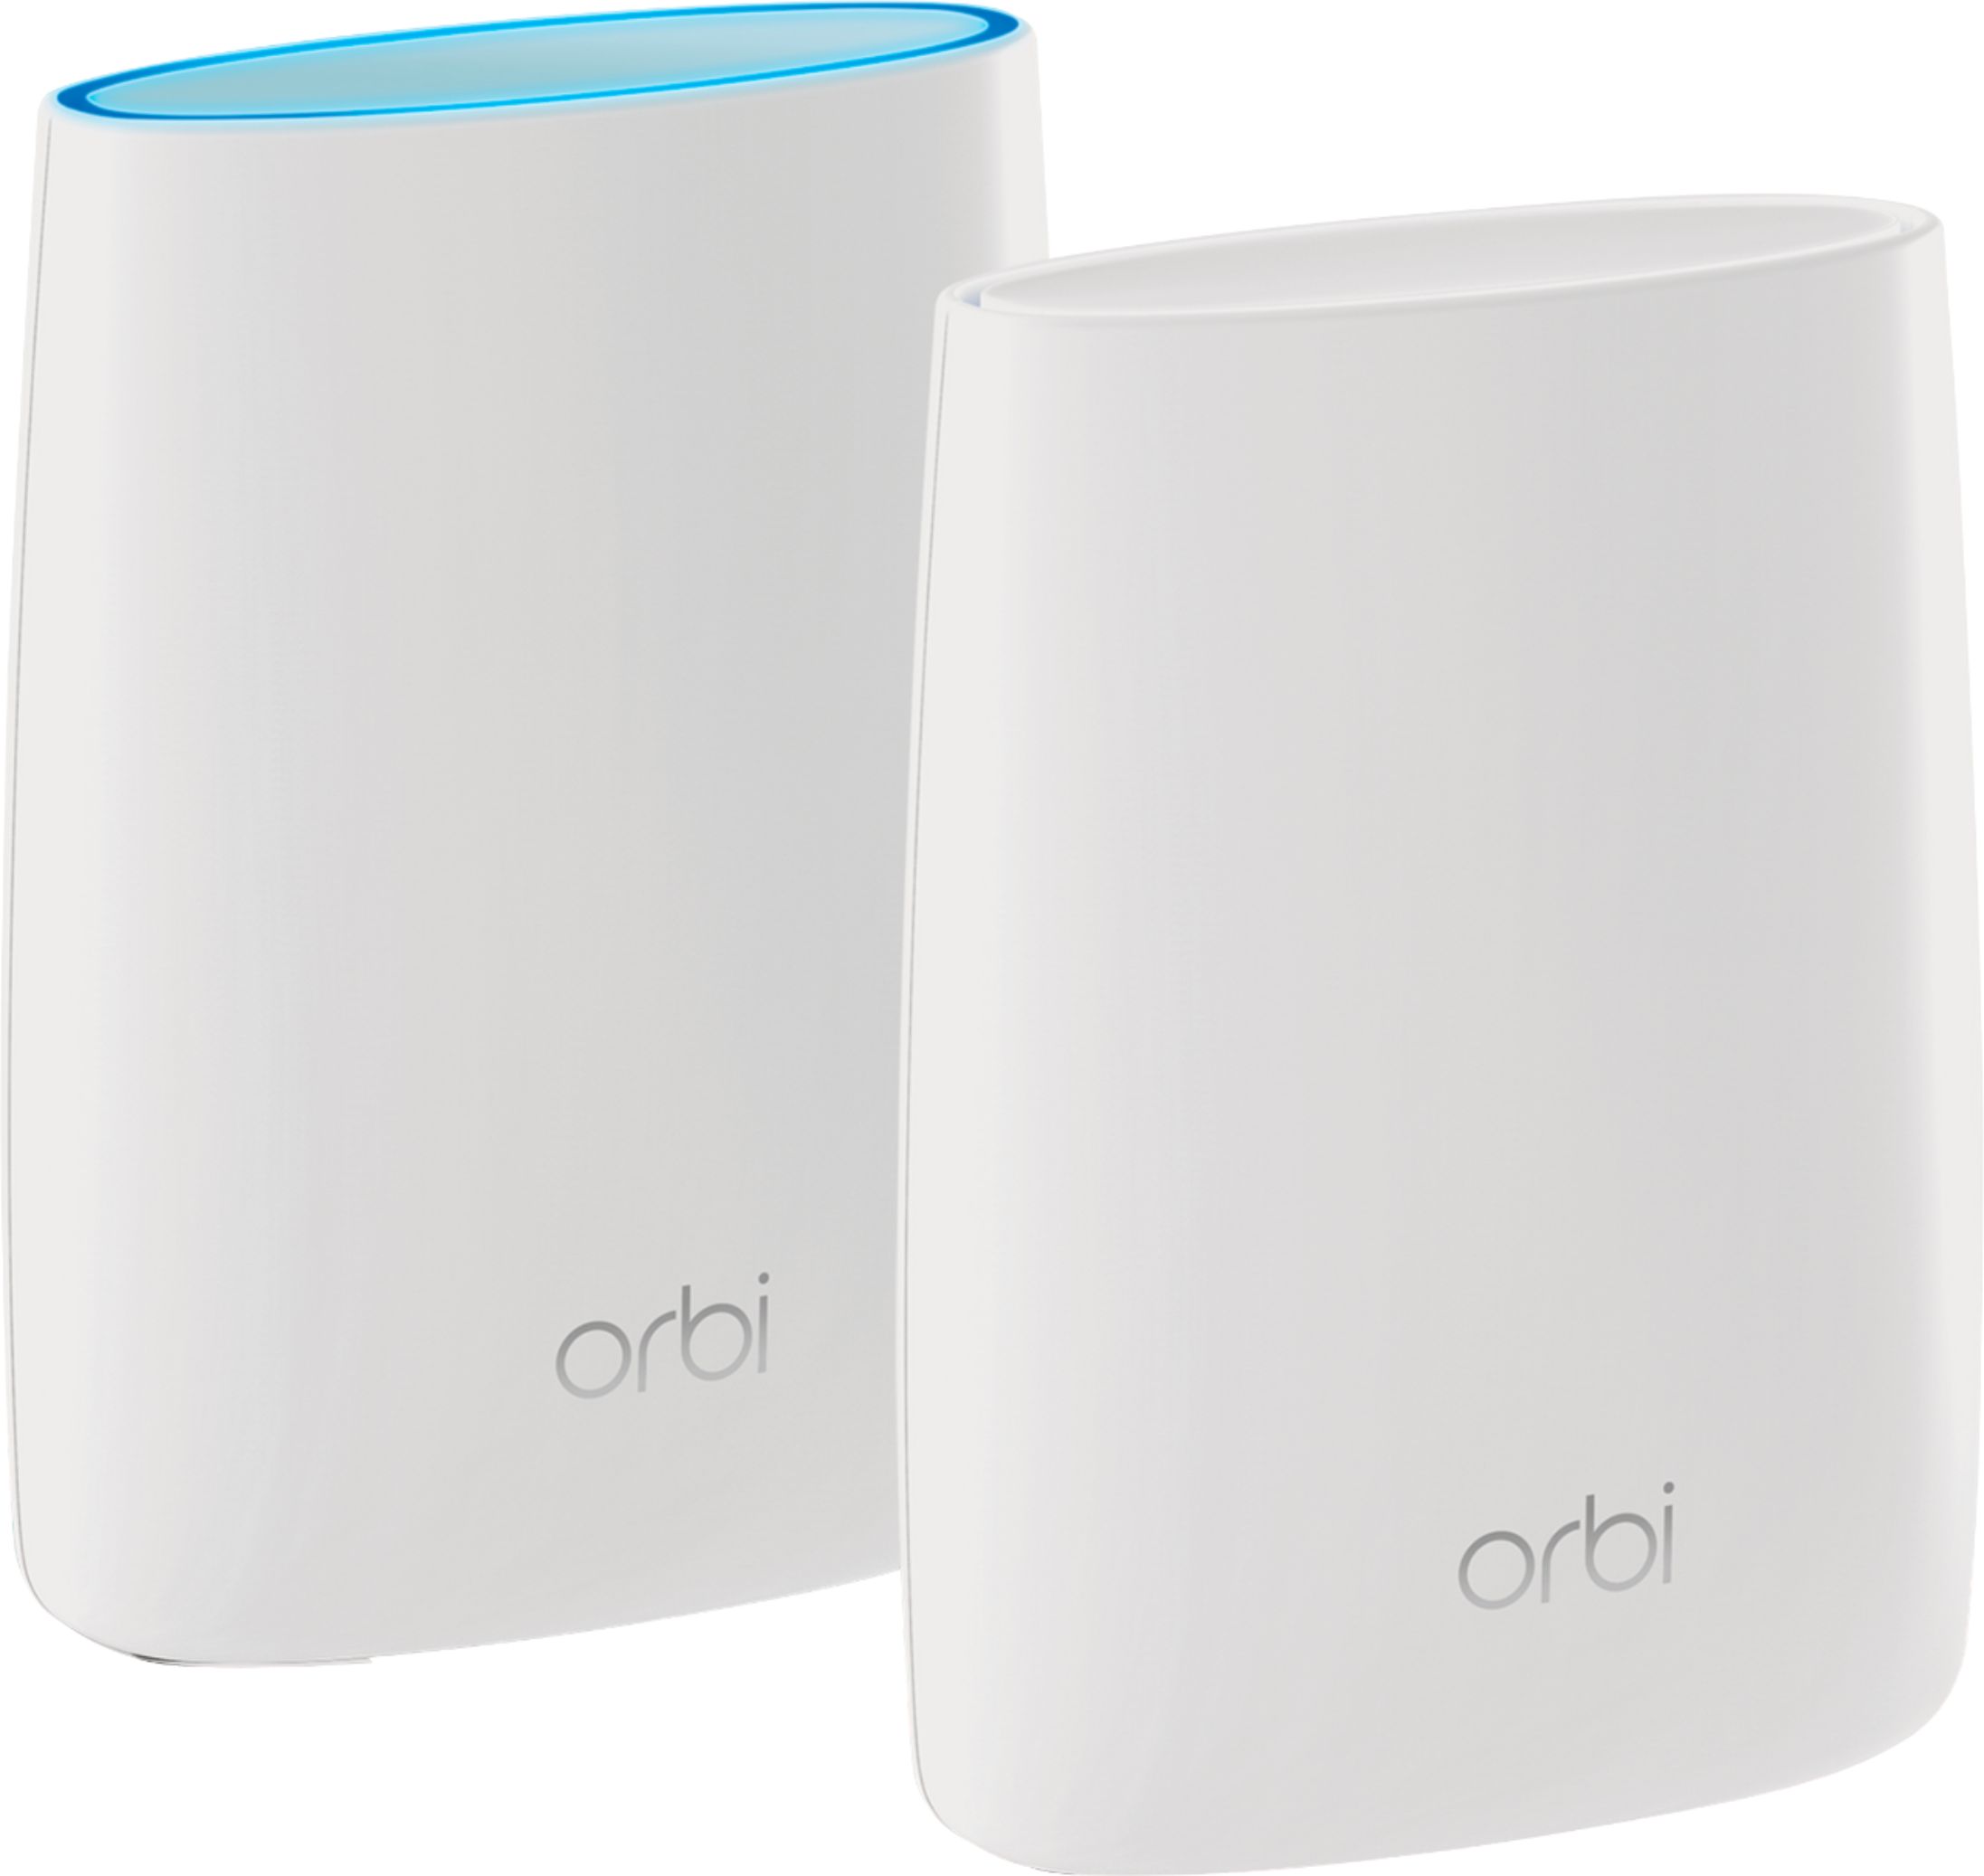 RBR50 Router only Netgear Orbi AC3000 Tri-Band Mesh Wi-Fi System White 